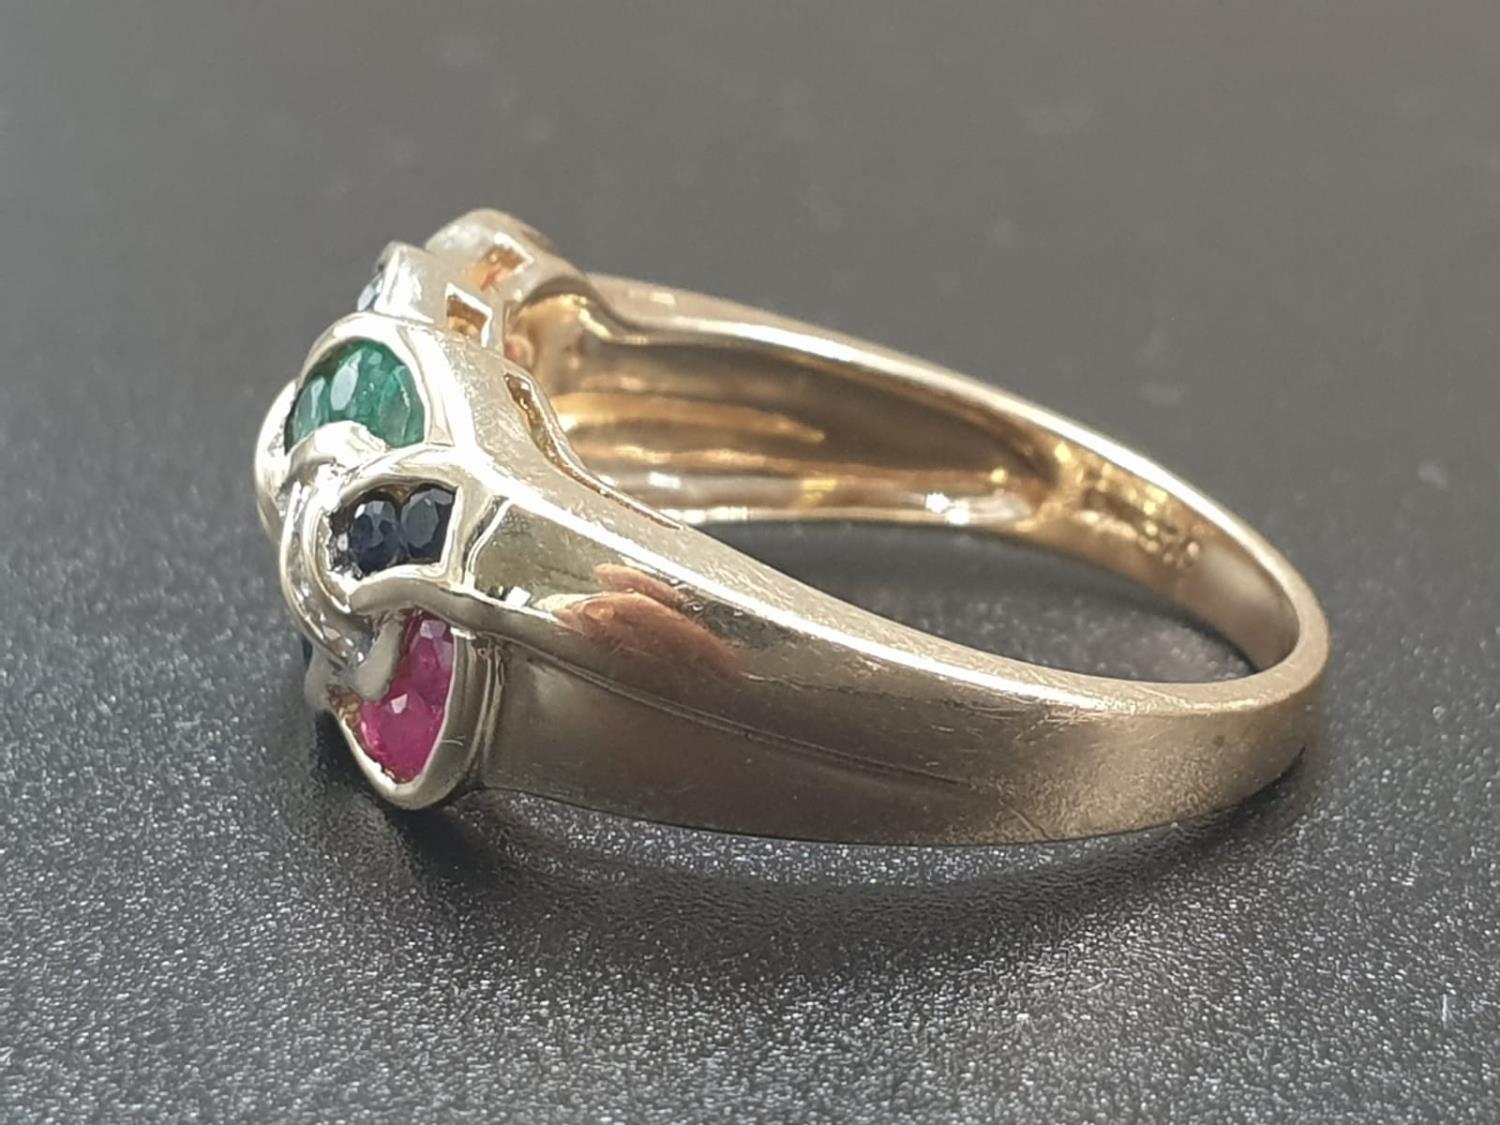 9K YELLOW GOLD VINTAGE MULTI STONE SET RING WITH DIAMOND, RUBY, SAPPHIRE & EMERALD , WEIGHT 4.3G - Image 3 of 7